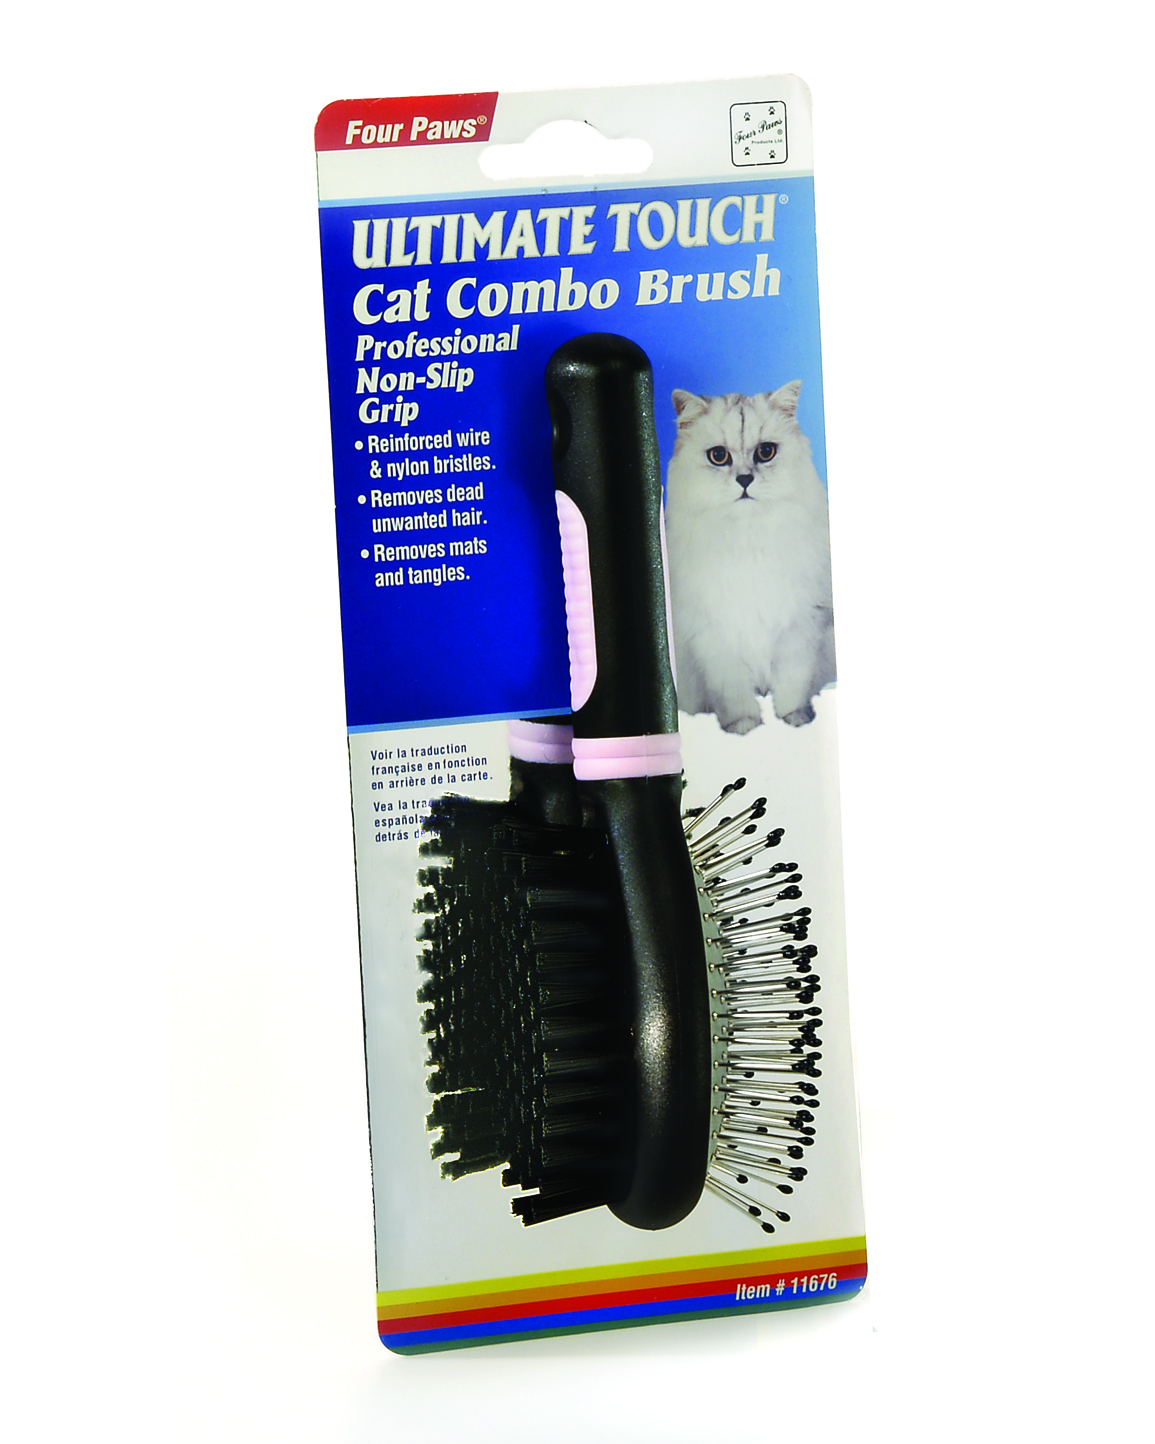 ULTIMATE TOUCH CAT COMBO BRUSH